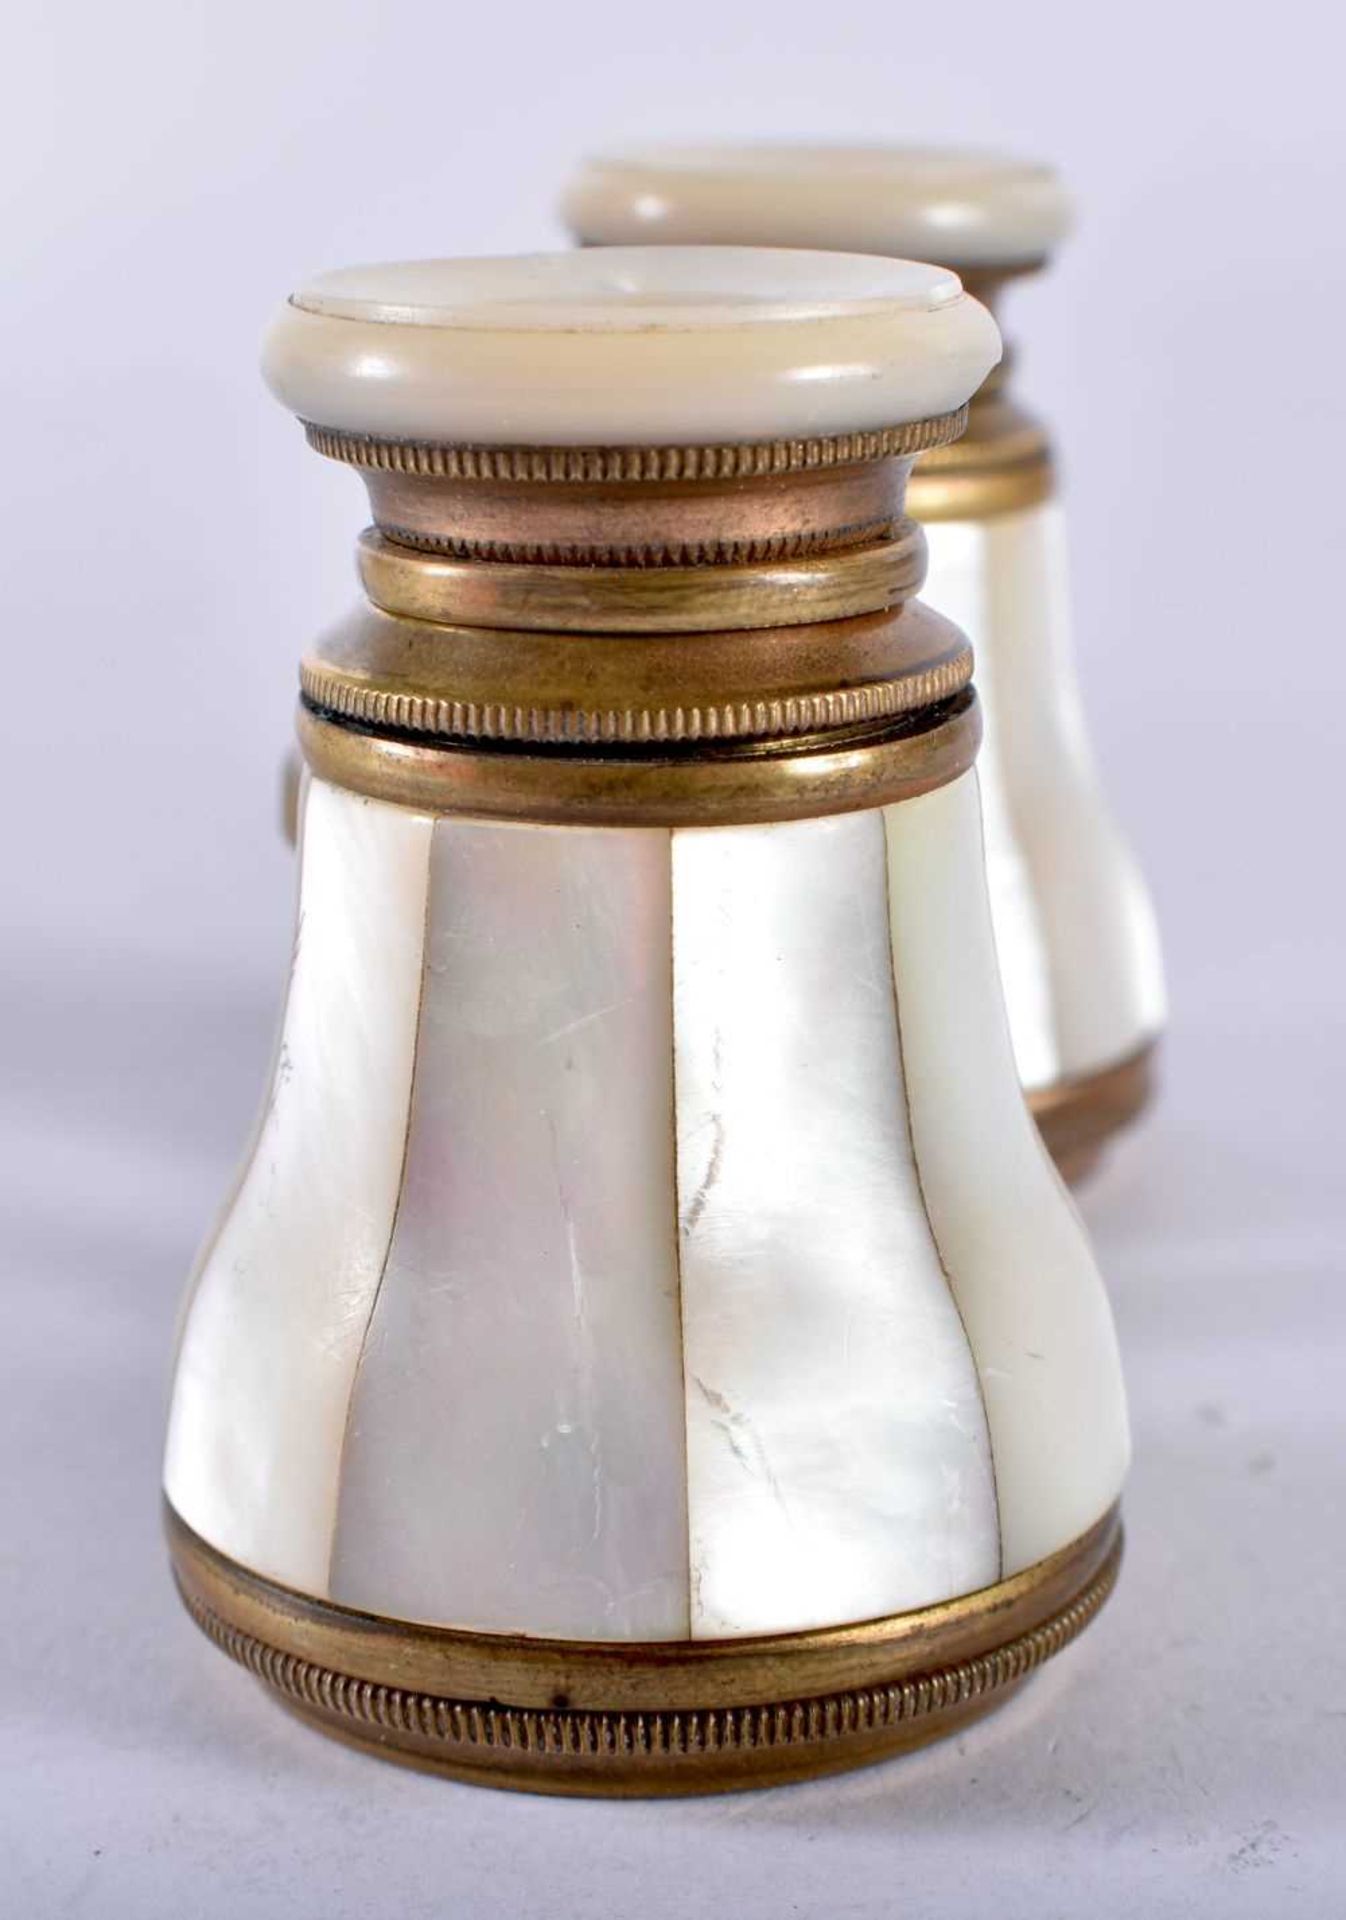 A PAIR OF MOTHER OF PEARL INLAID OPERA GLASSES with fitting for handle. 9.8 cm x 6cm extended. - Image 2 of 5